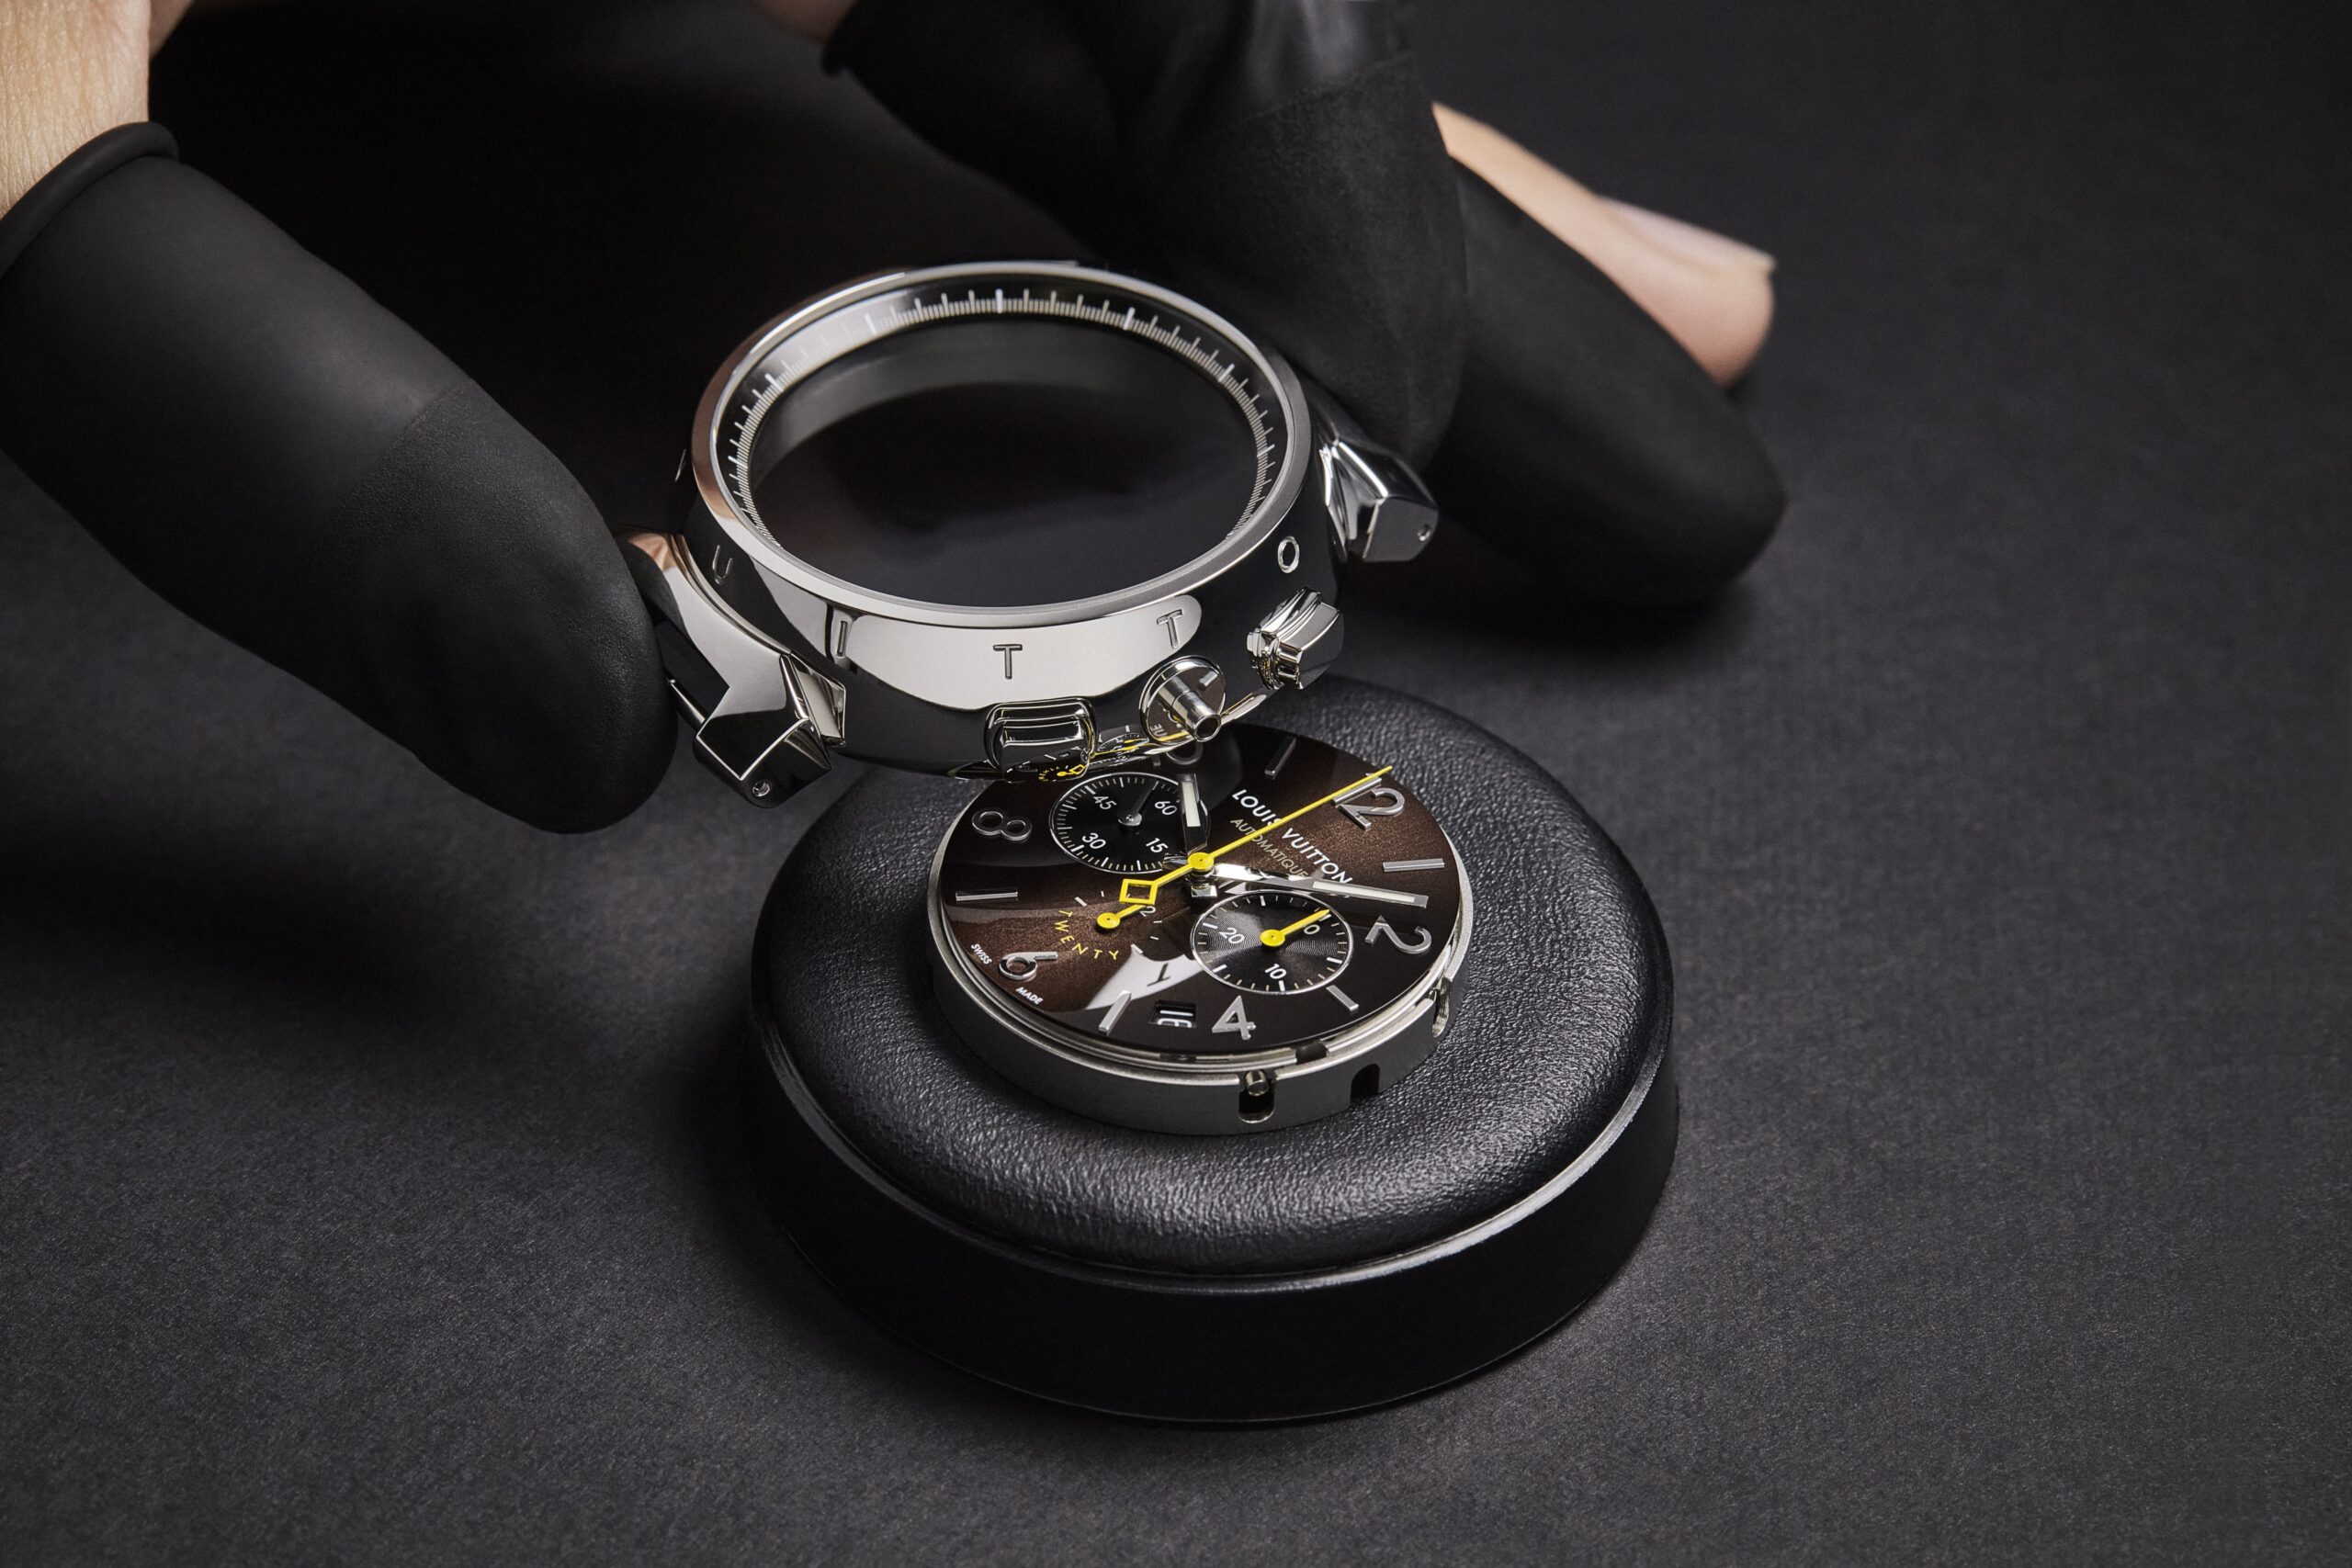 The Louis Vuitton Tambour Celebrates 20 Years with the Tambour